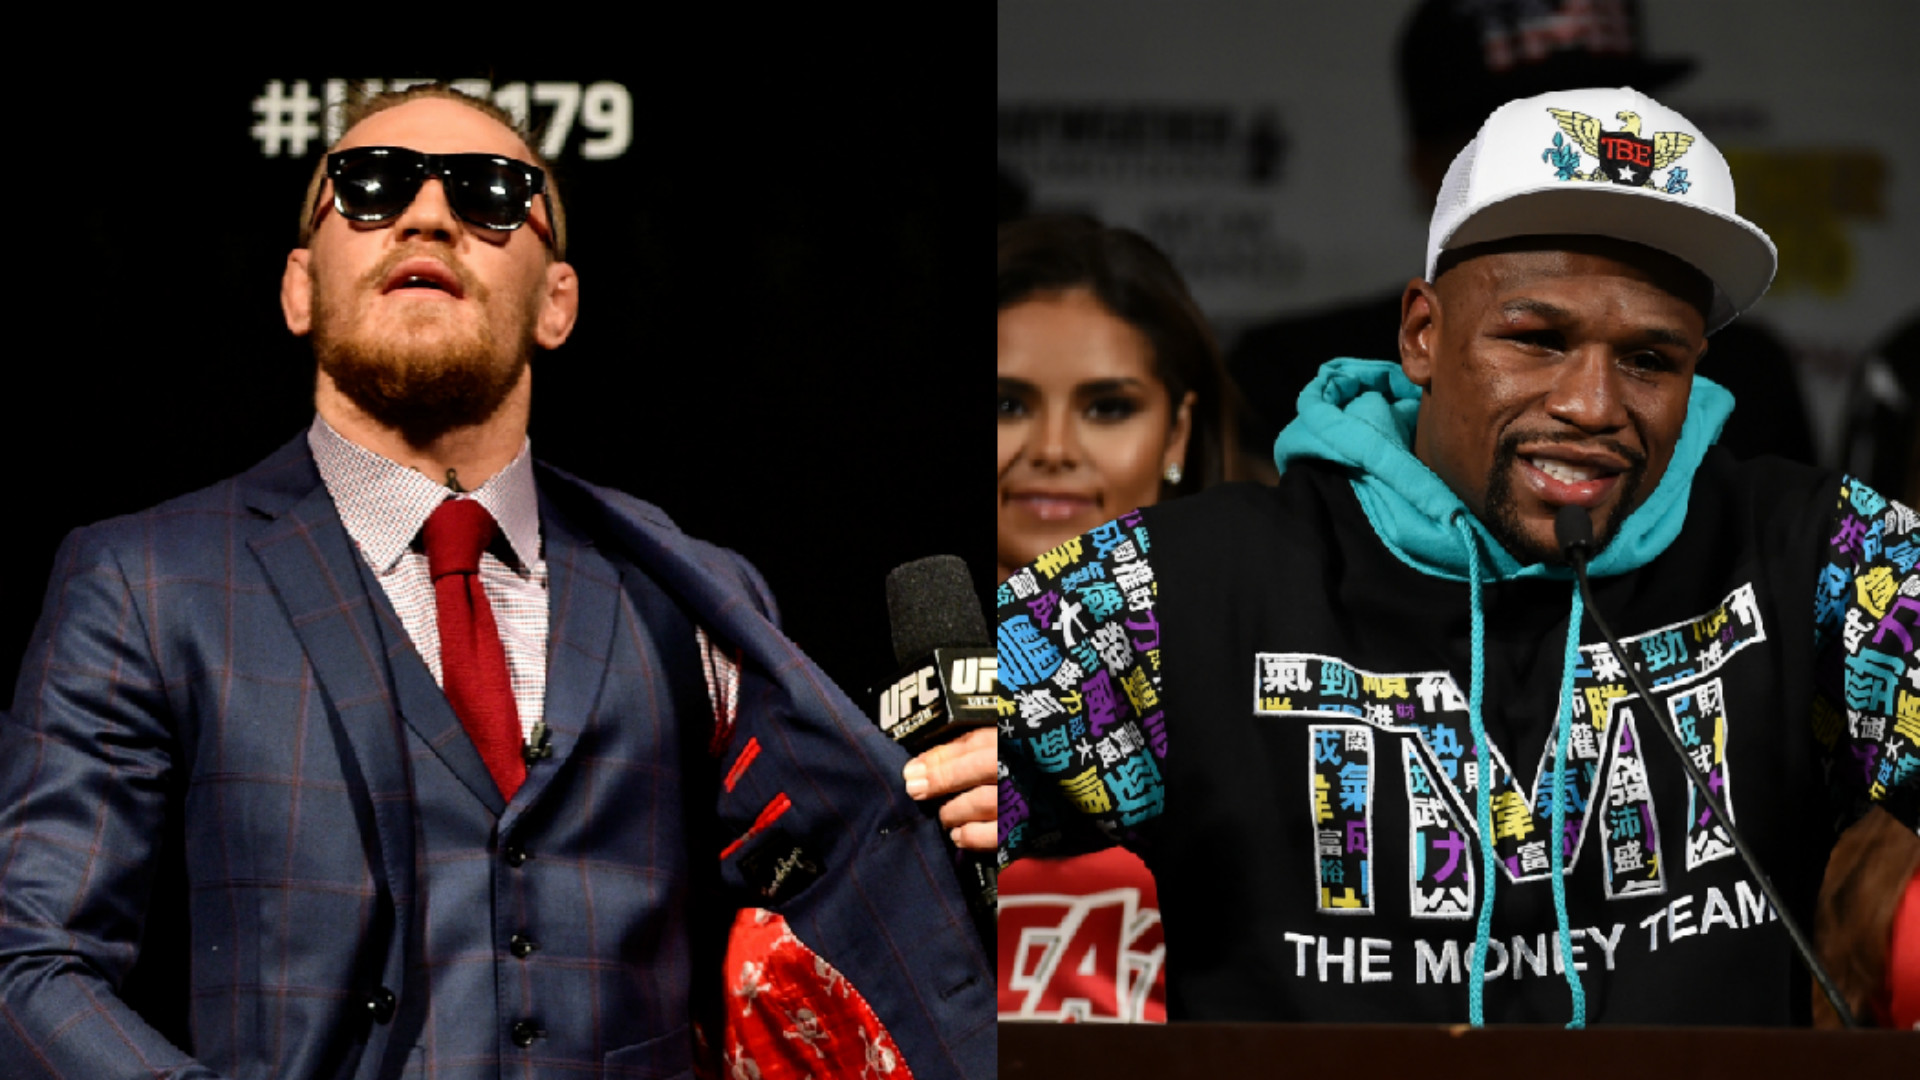 Press conference for Mayweather vs. McGregor set for July 11th MMA Sporting News